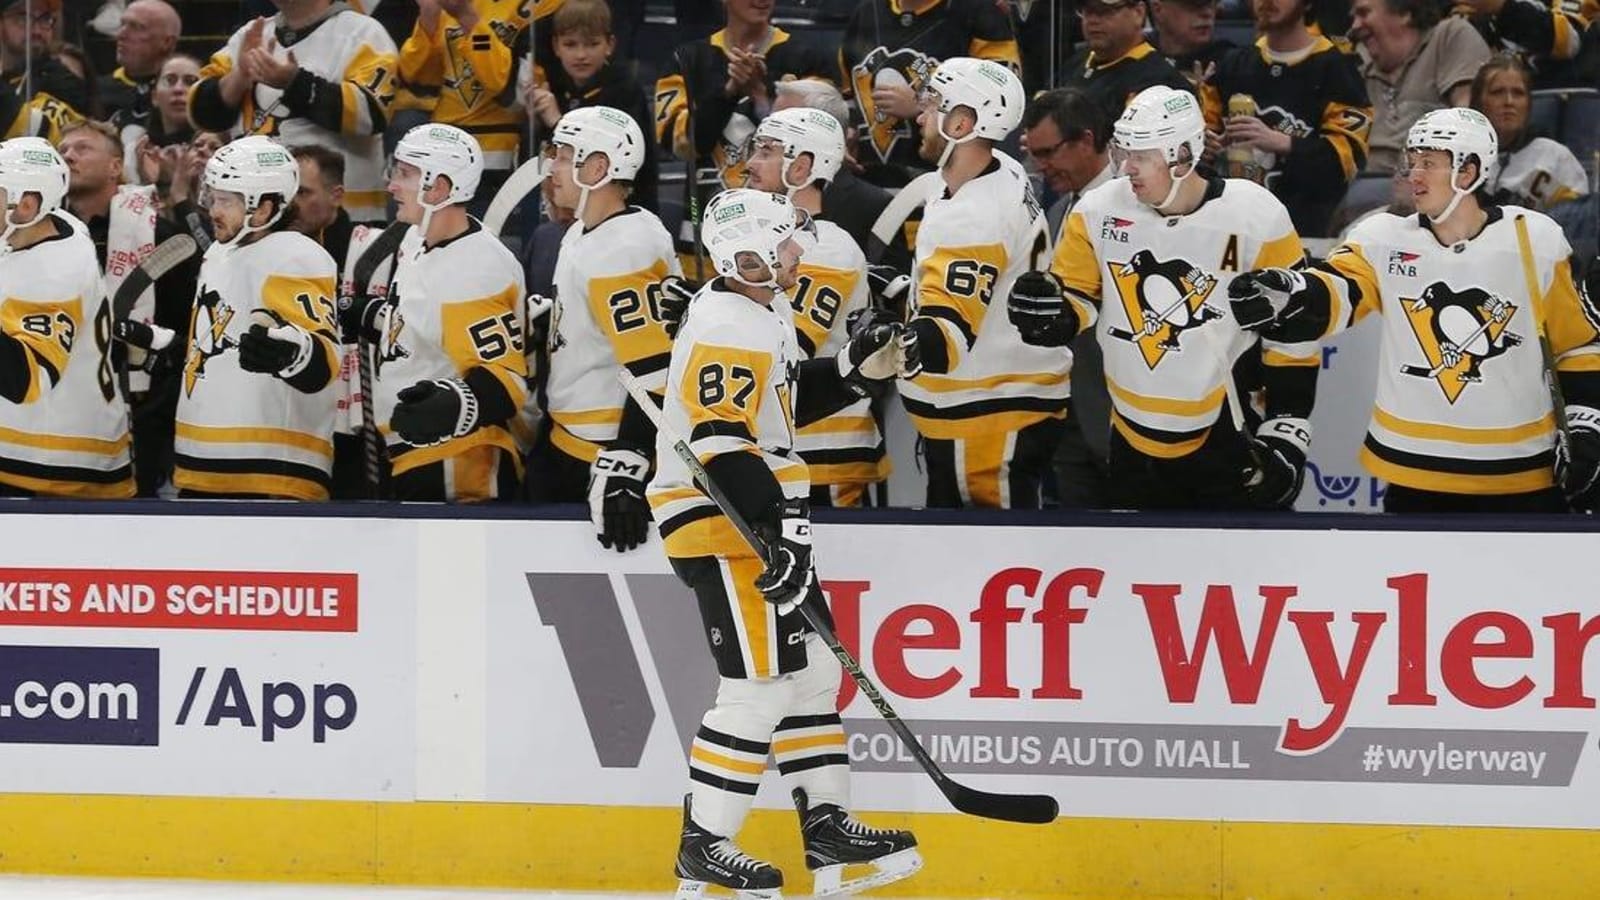 NHL roundup: Sidney Crosby (hat trick) lifts Pens past Jackets